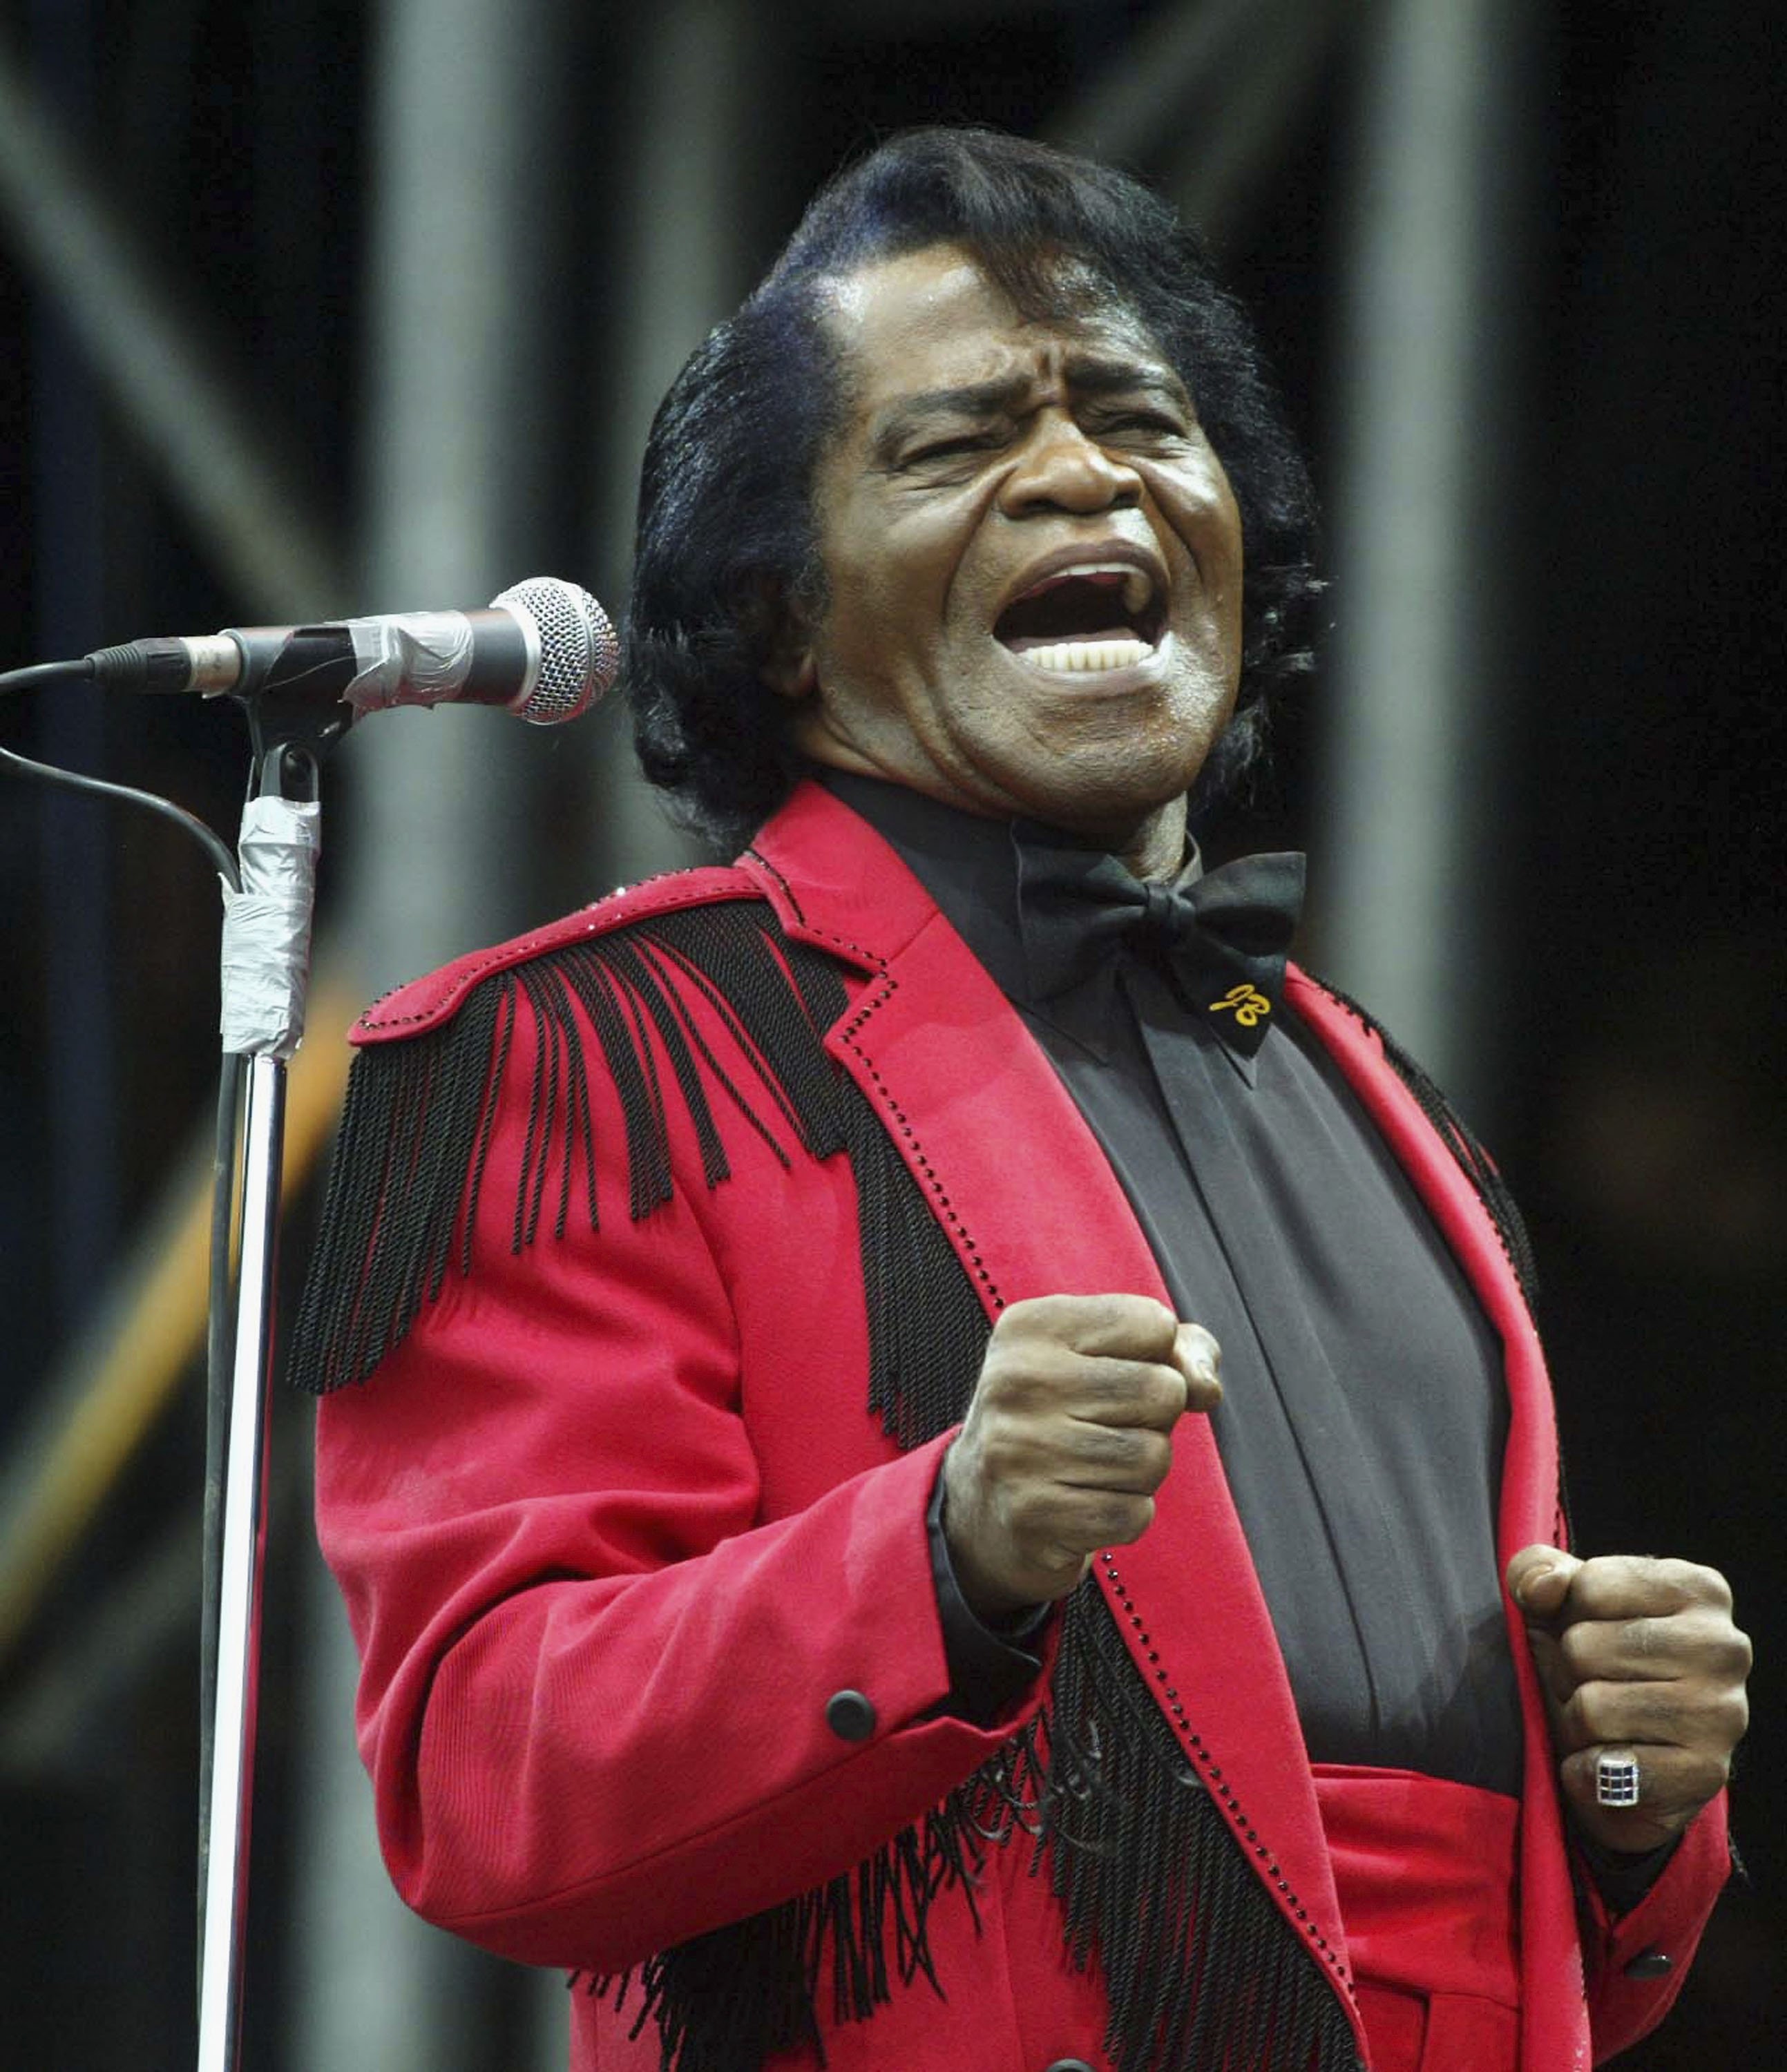 James Brown performing in England on June 27, 2004. | Photo: Getty Images